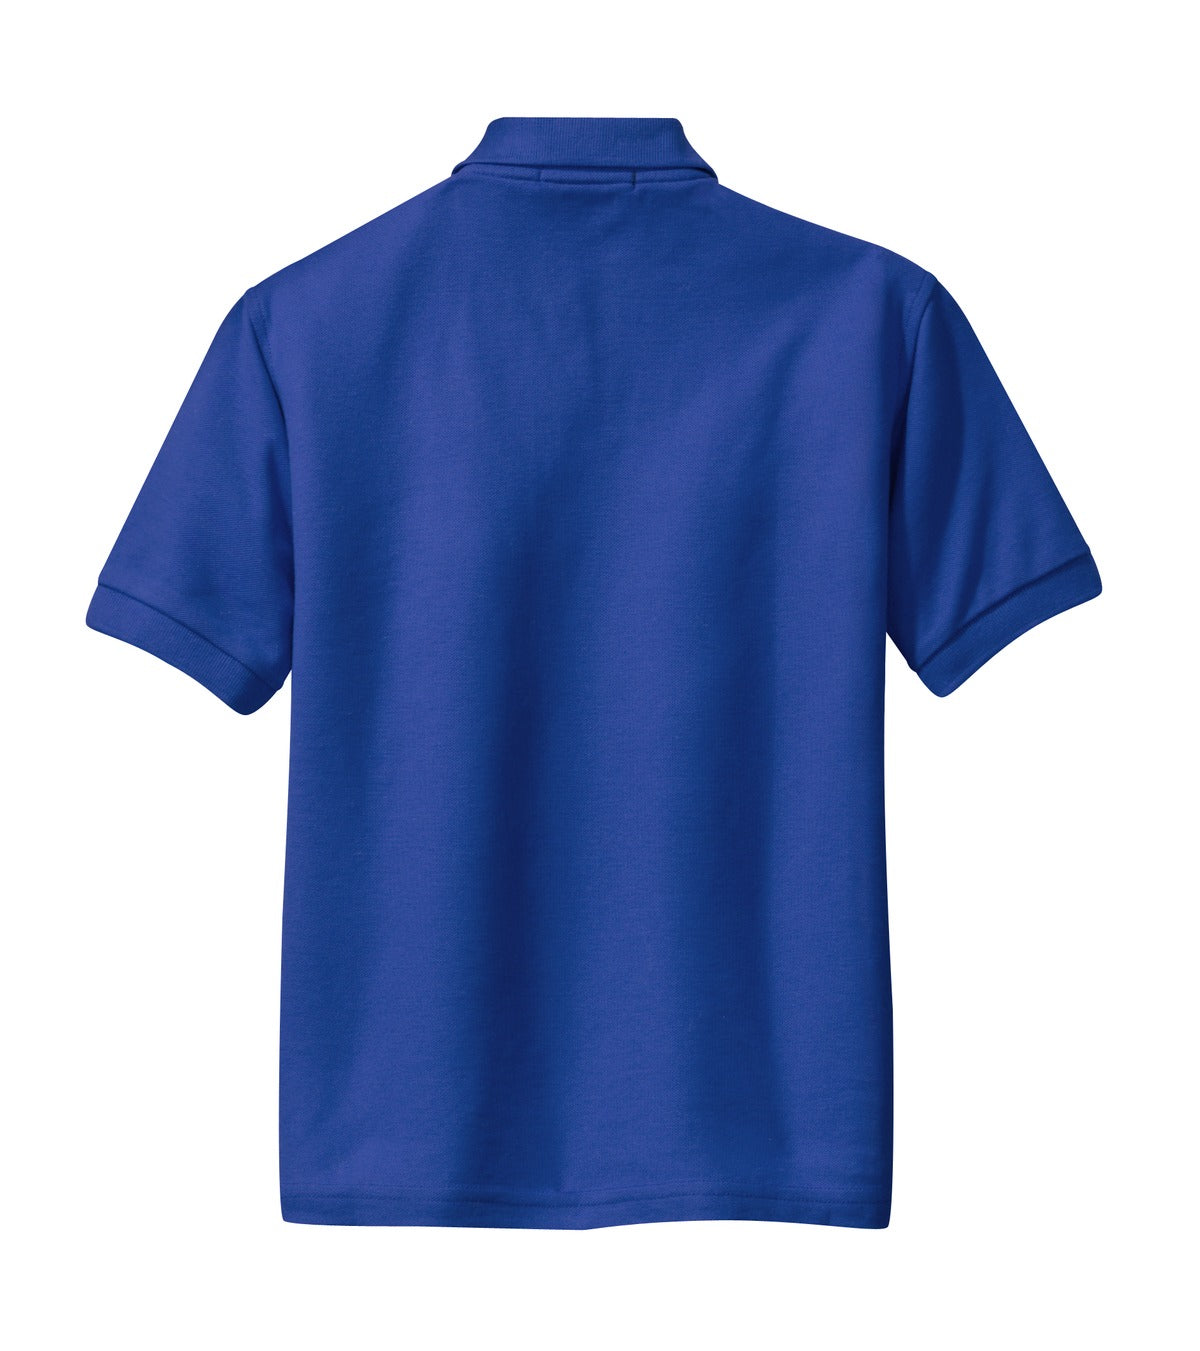 Port Authority Youth Silk Touch™ Polo. Y500